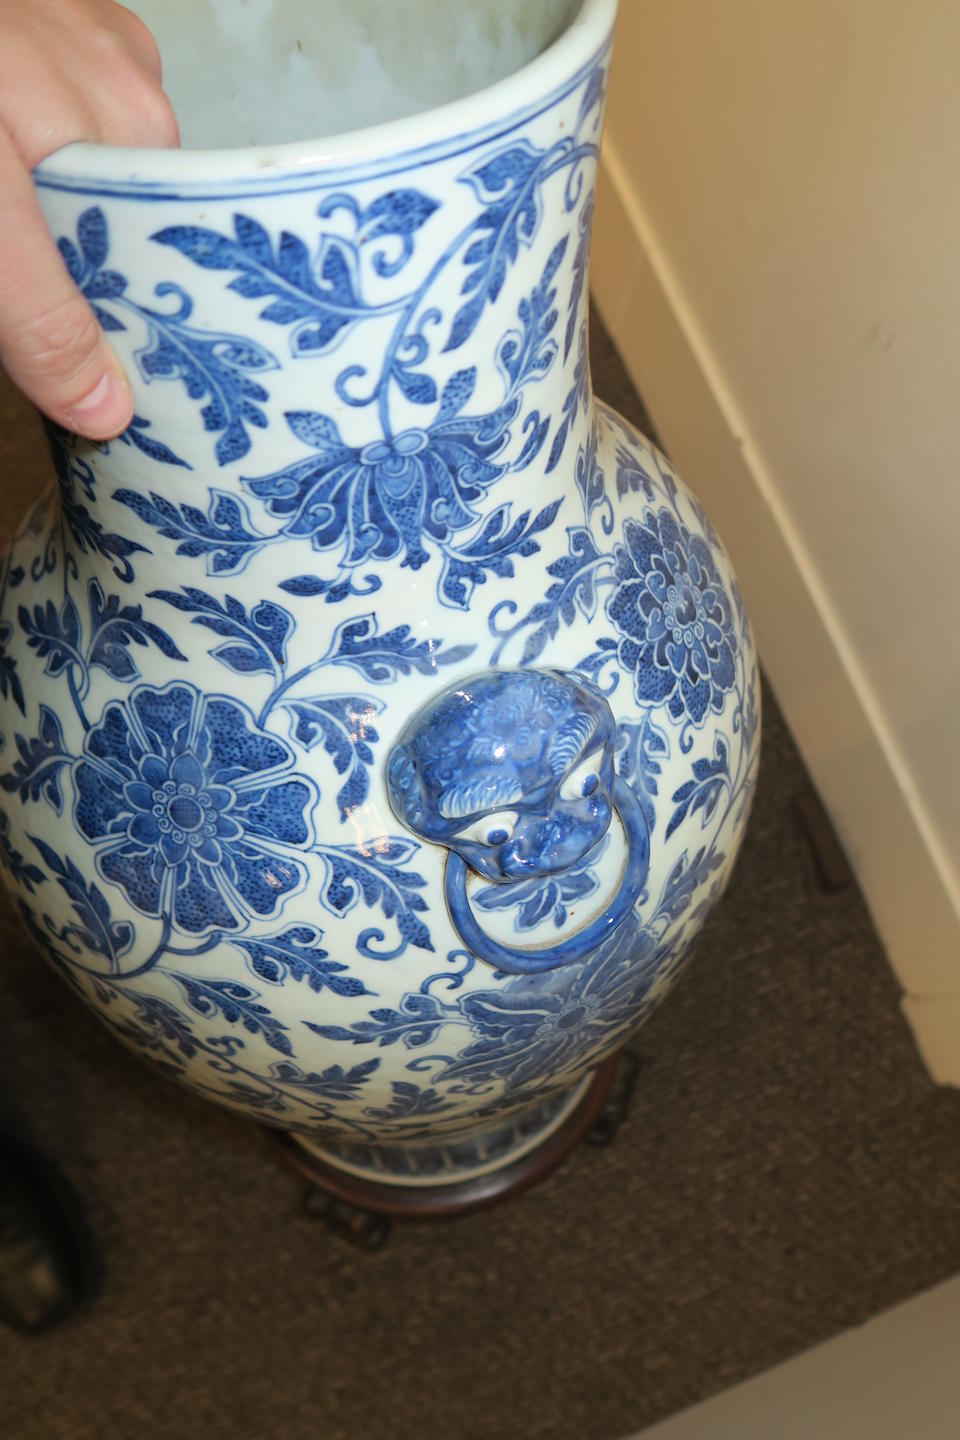 A large blue and white floor vase with cover Late Qing/Republic period